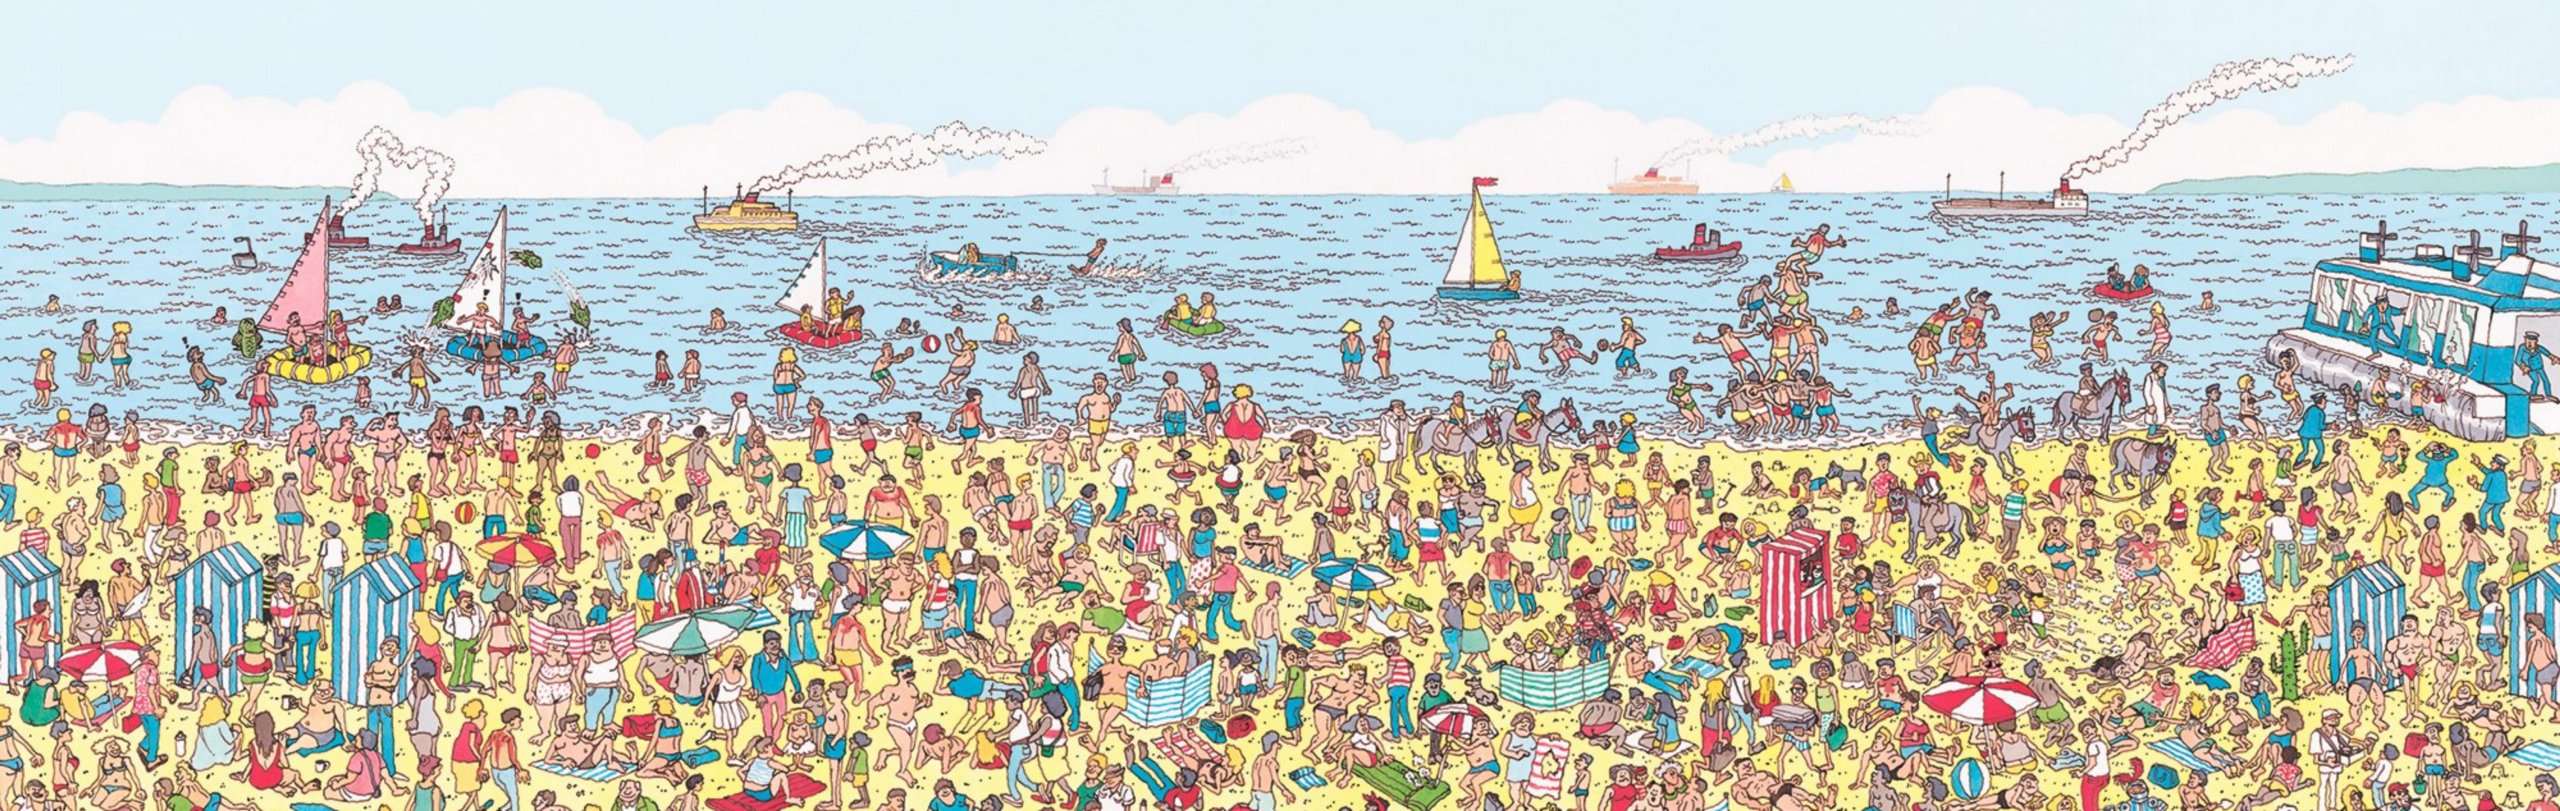 Where's Wally game graphic